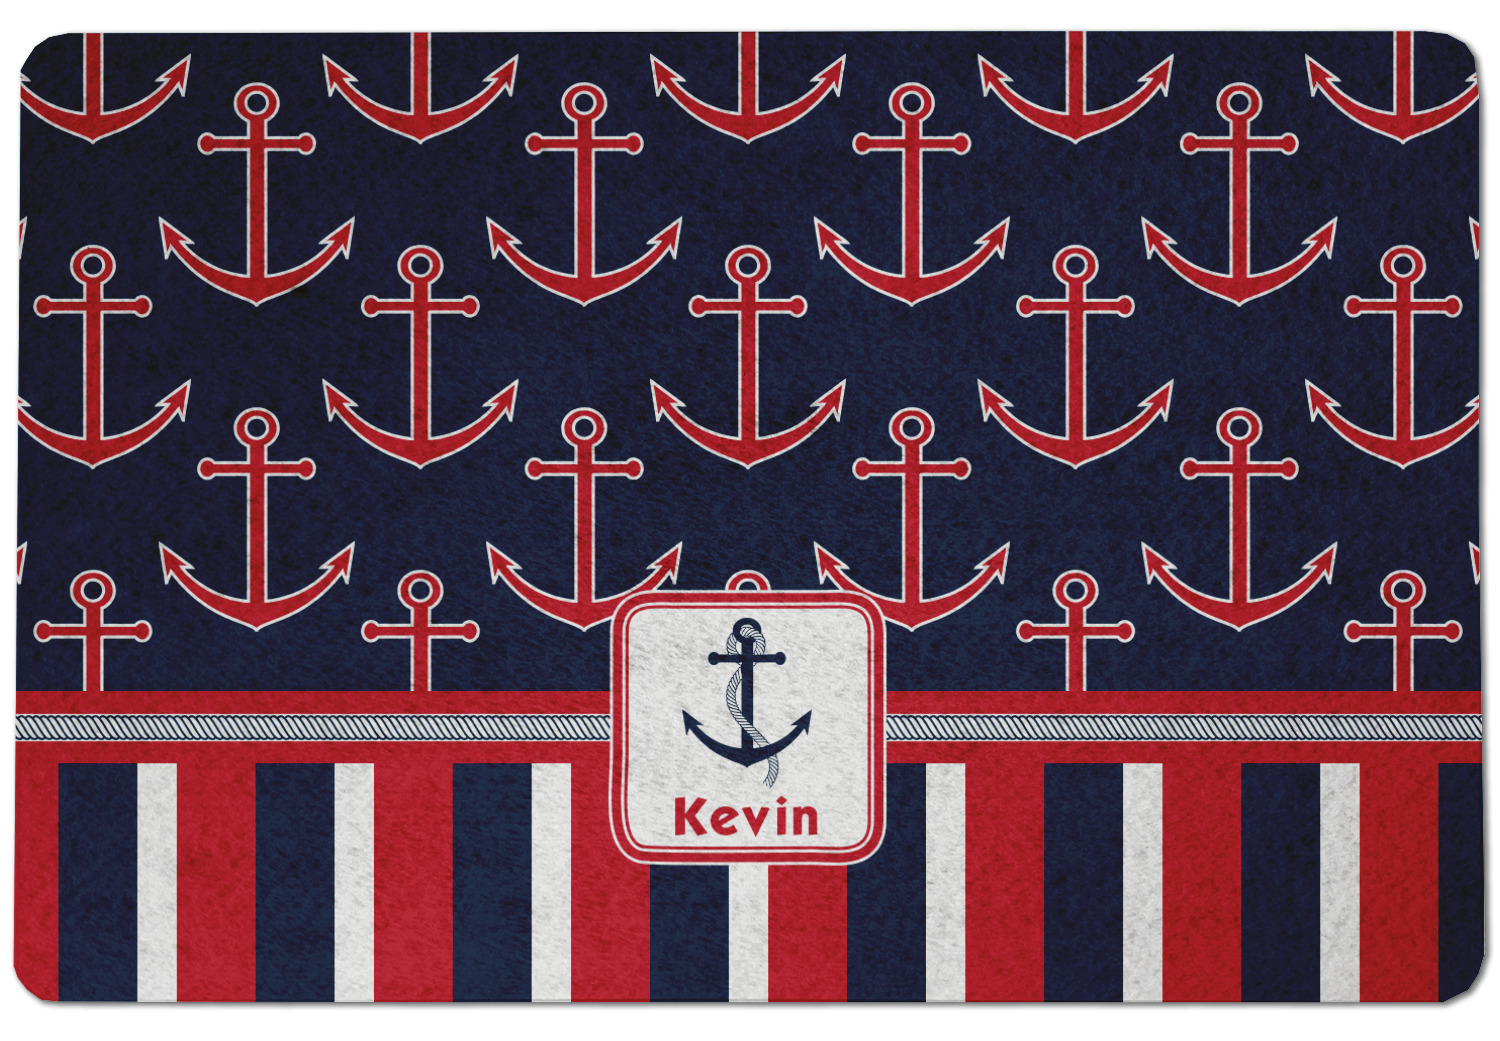 https://www.youcustomizeit.com/common/MAKE/190463/Nautical-Anchors-Stripes-Dog-Food-Mat-Small-without-bowls.jpg?lm=1610642537